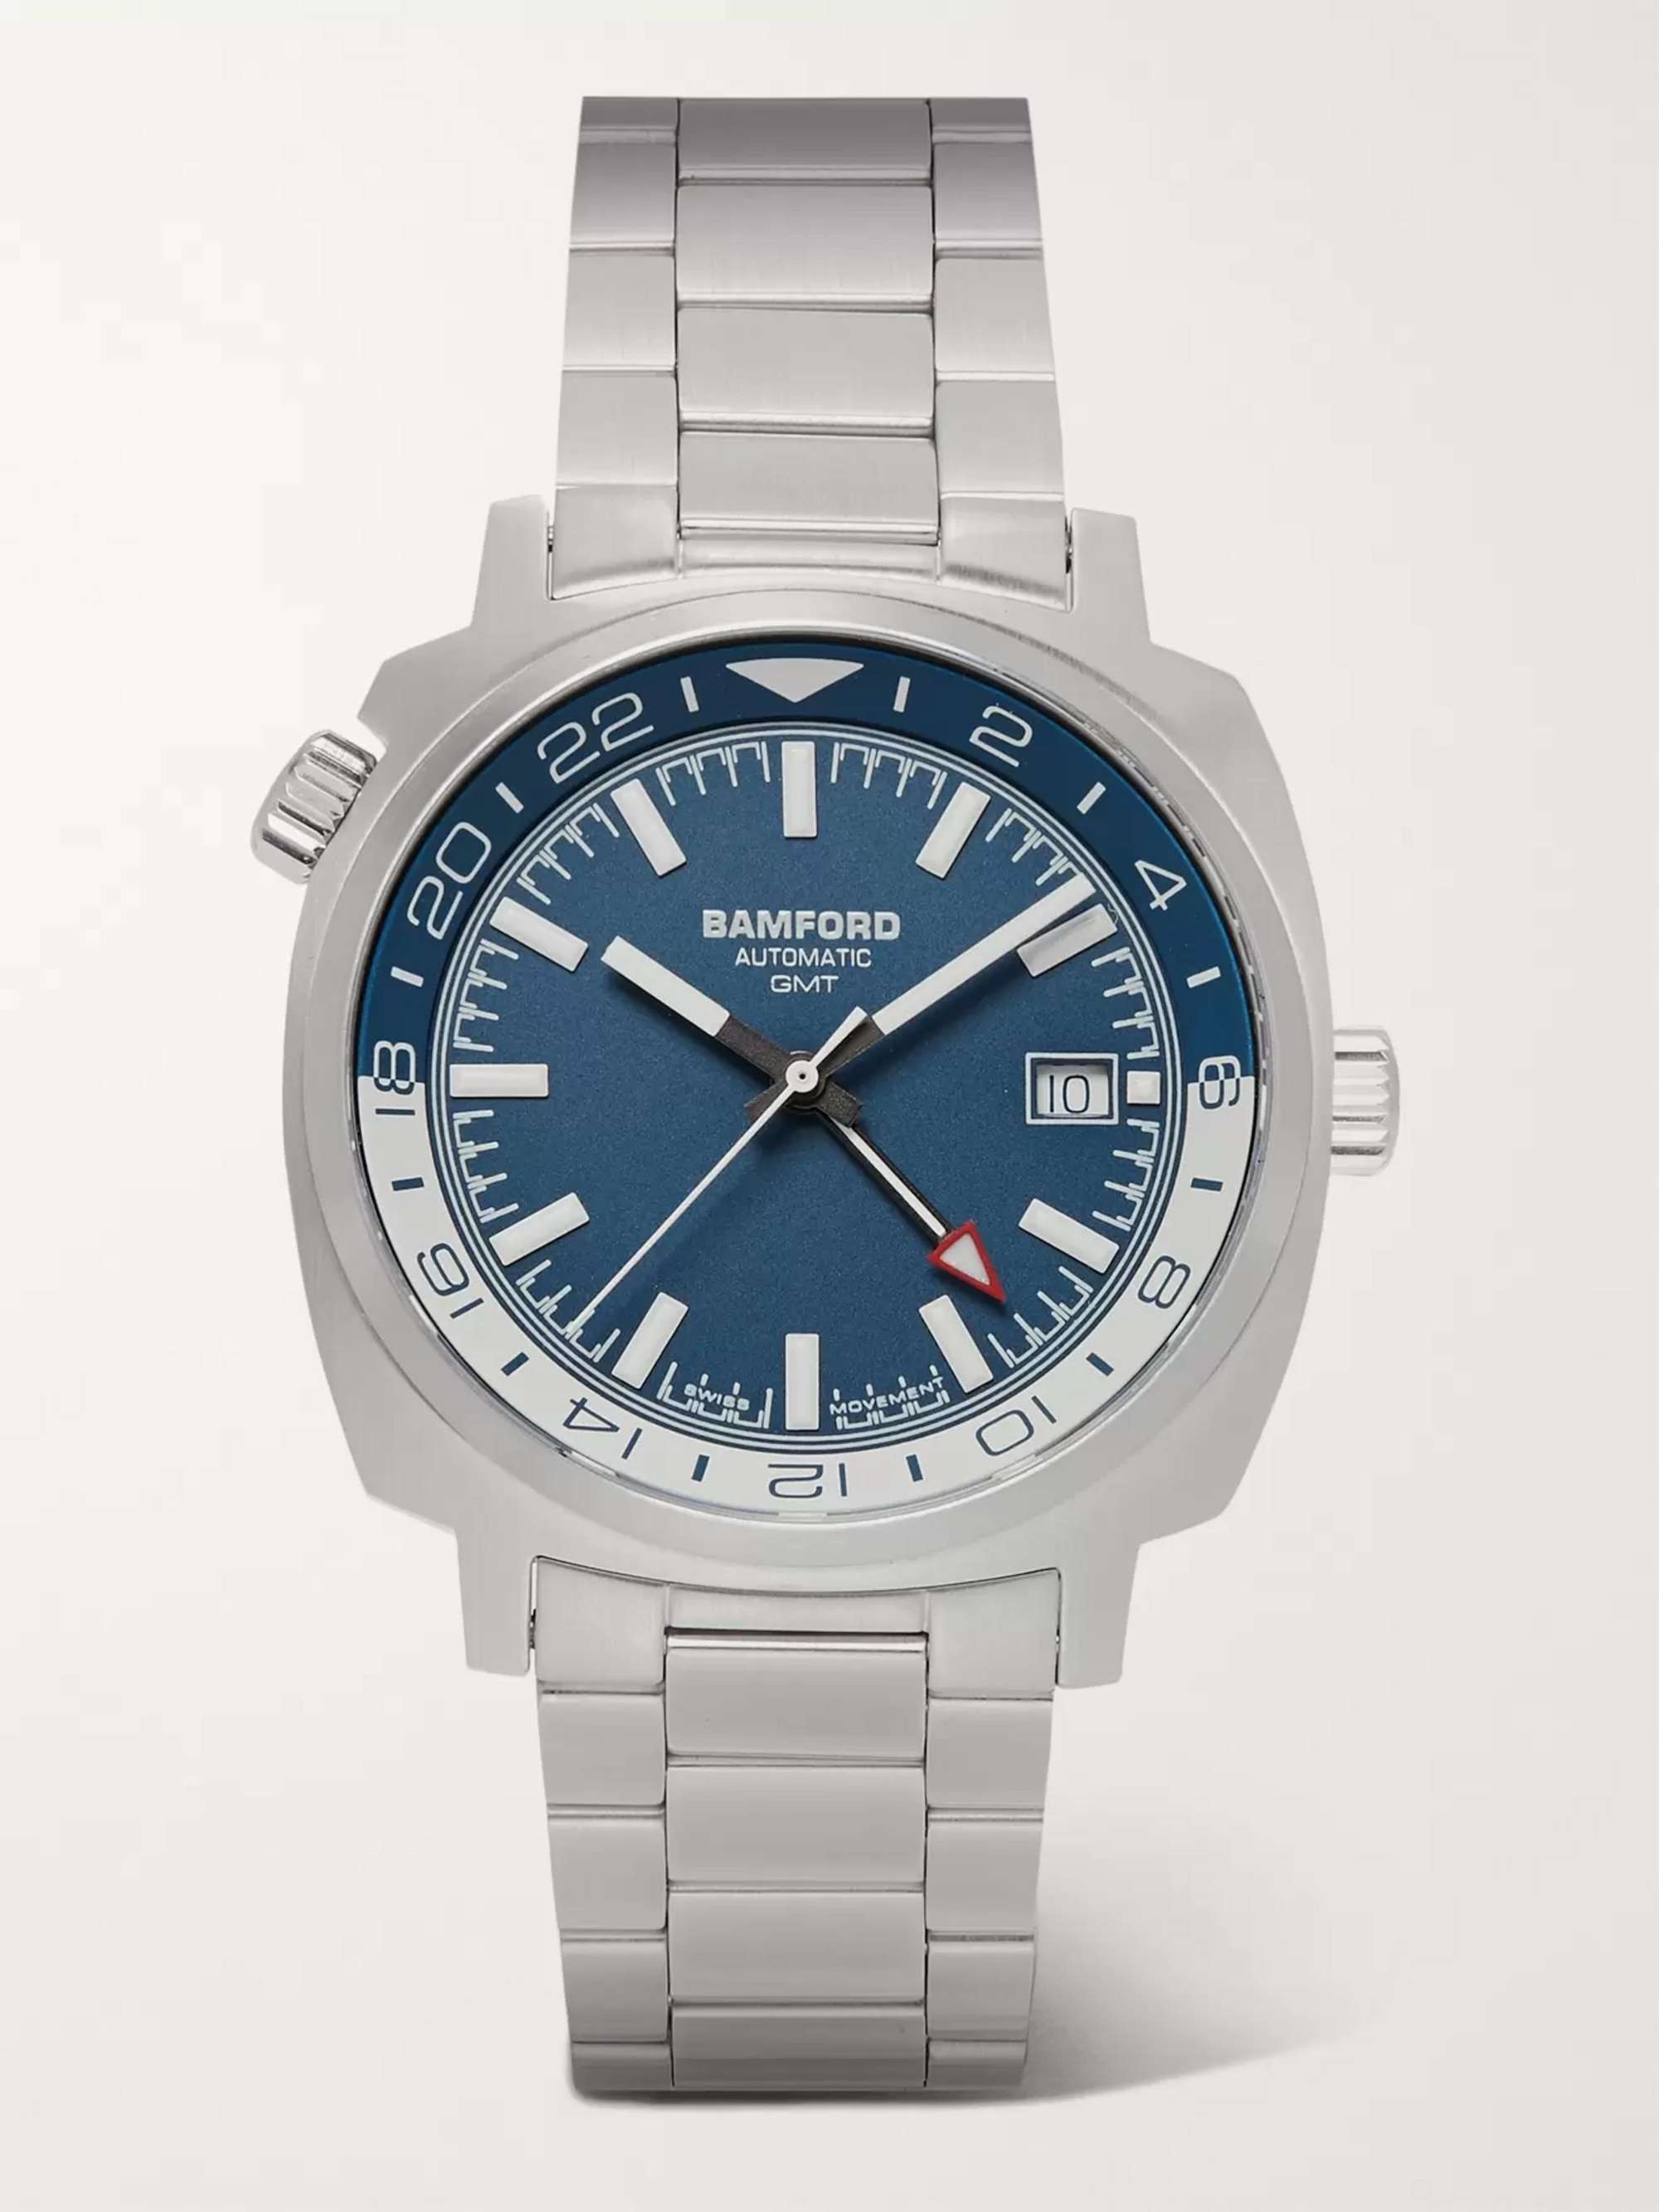 BAMFORD LONDON GMT Automatic 40mm Stainless Steel Watch